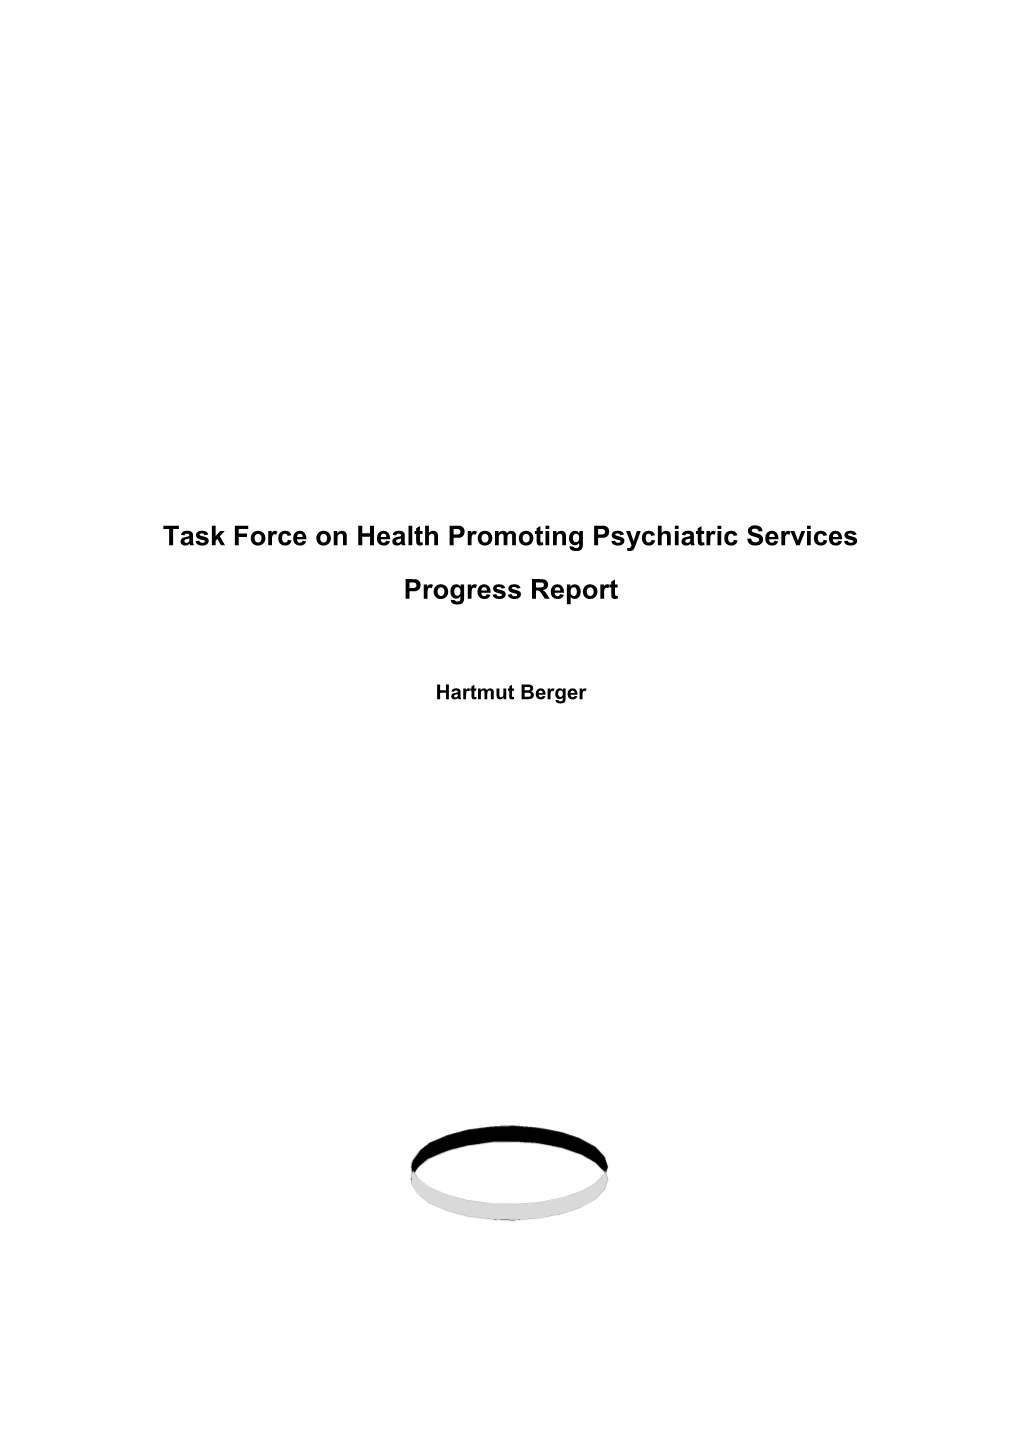 Task Force on Health Promoting Psychiatric Services